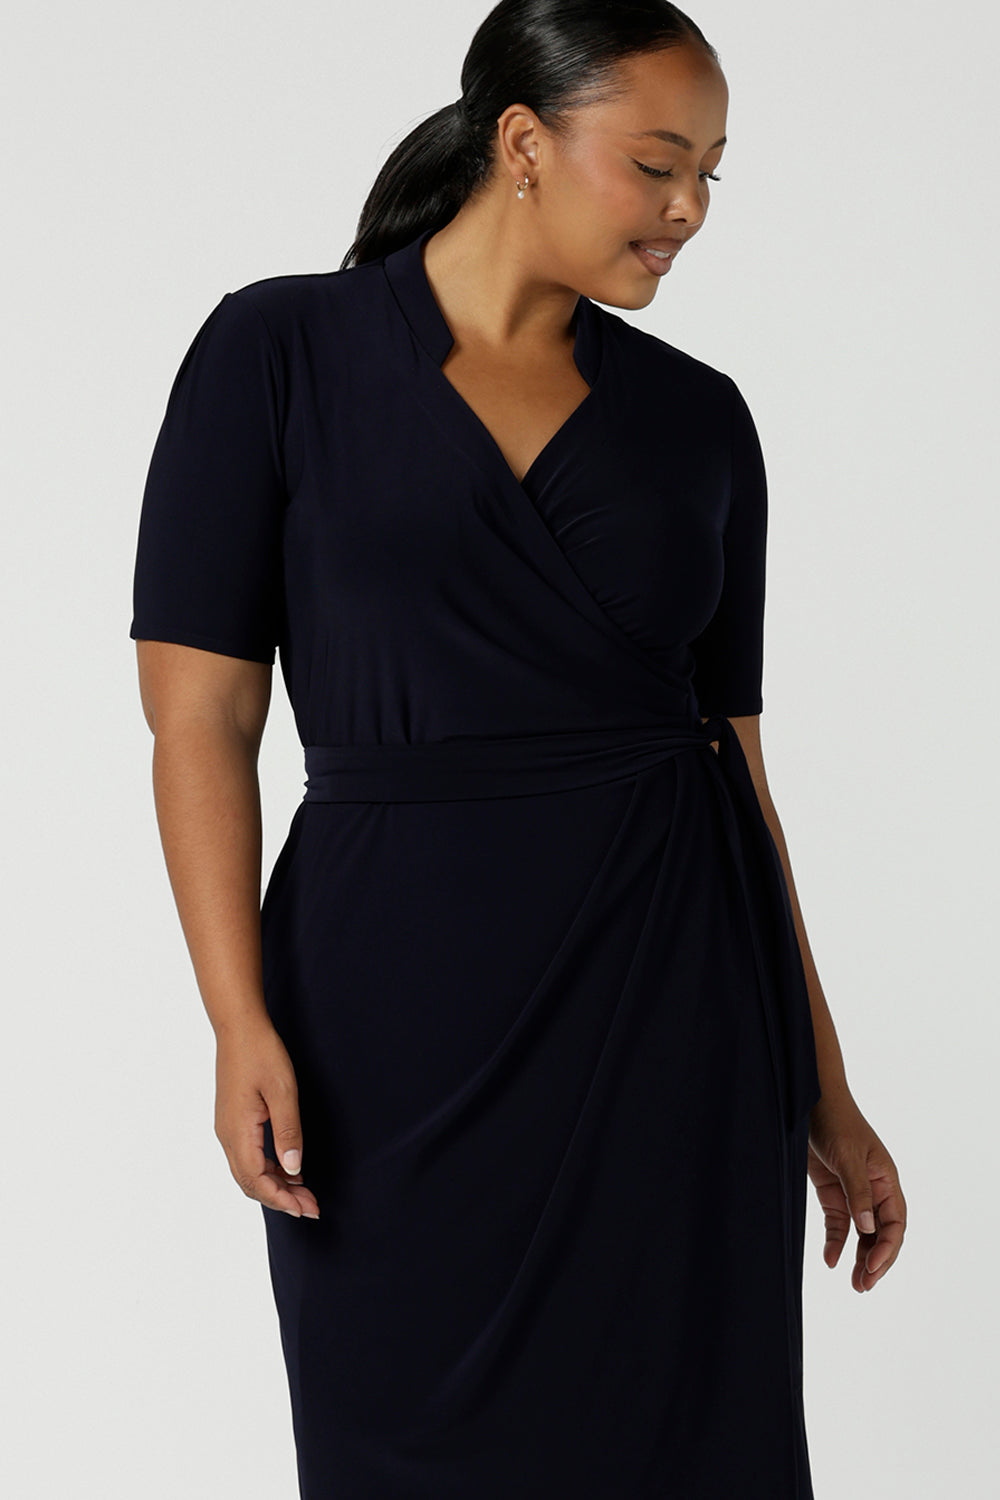 Kade dress in Navy in s a size 16 is a functioning wrap dress in navy. Featuring a mandarin collar and short sleeves. Gathered at the waist with a functioning tie. Made in Australia for women size 8 - 24.